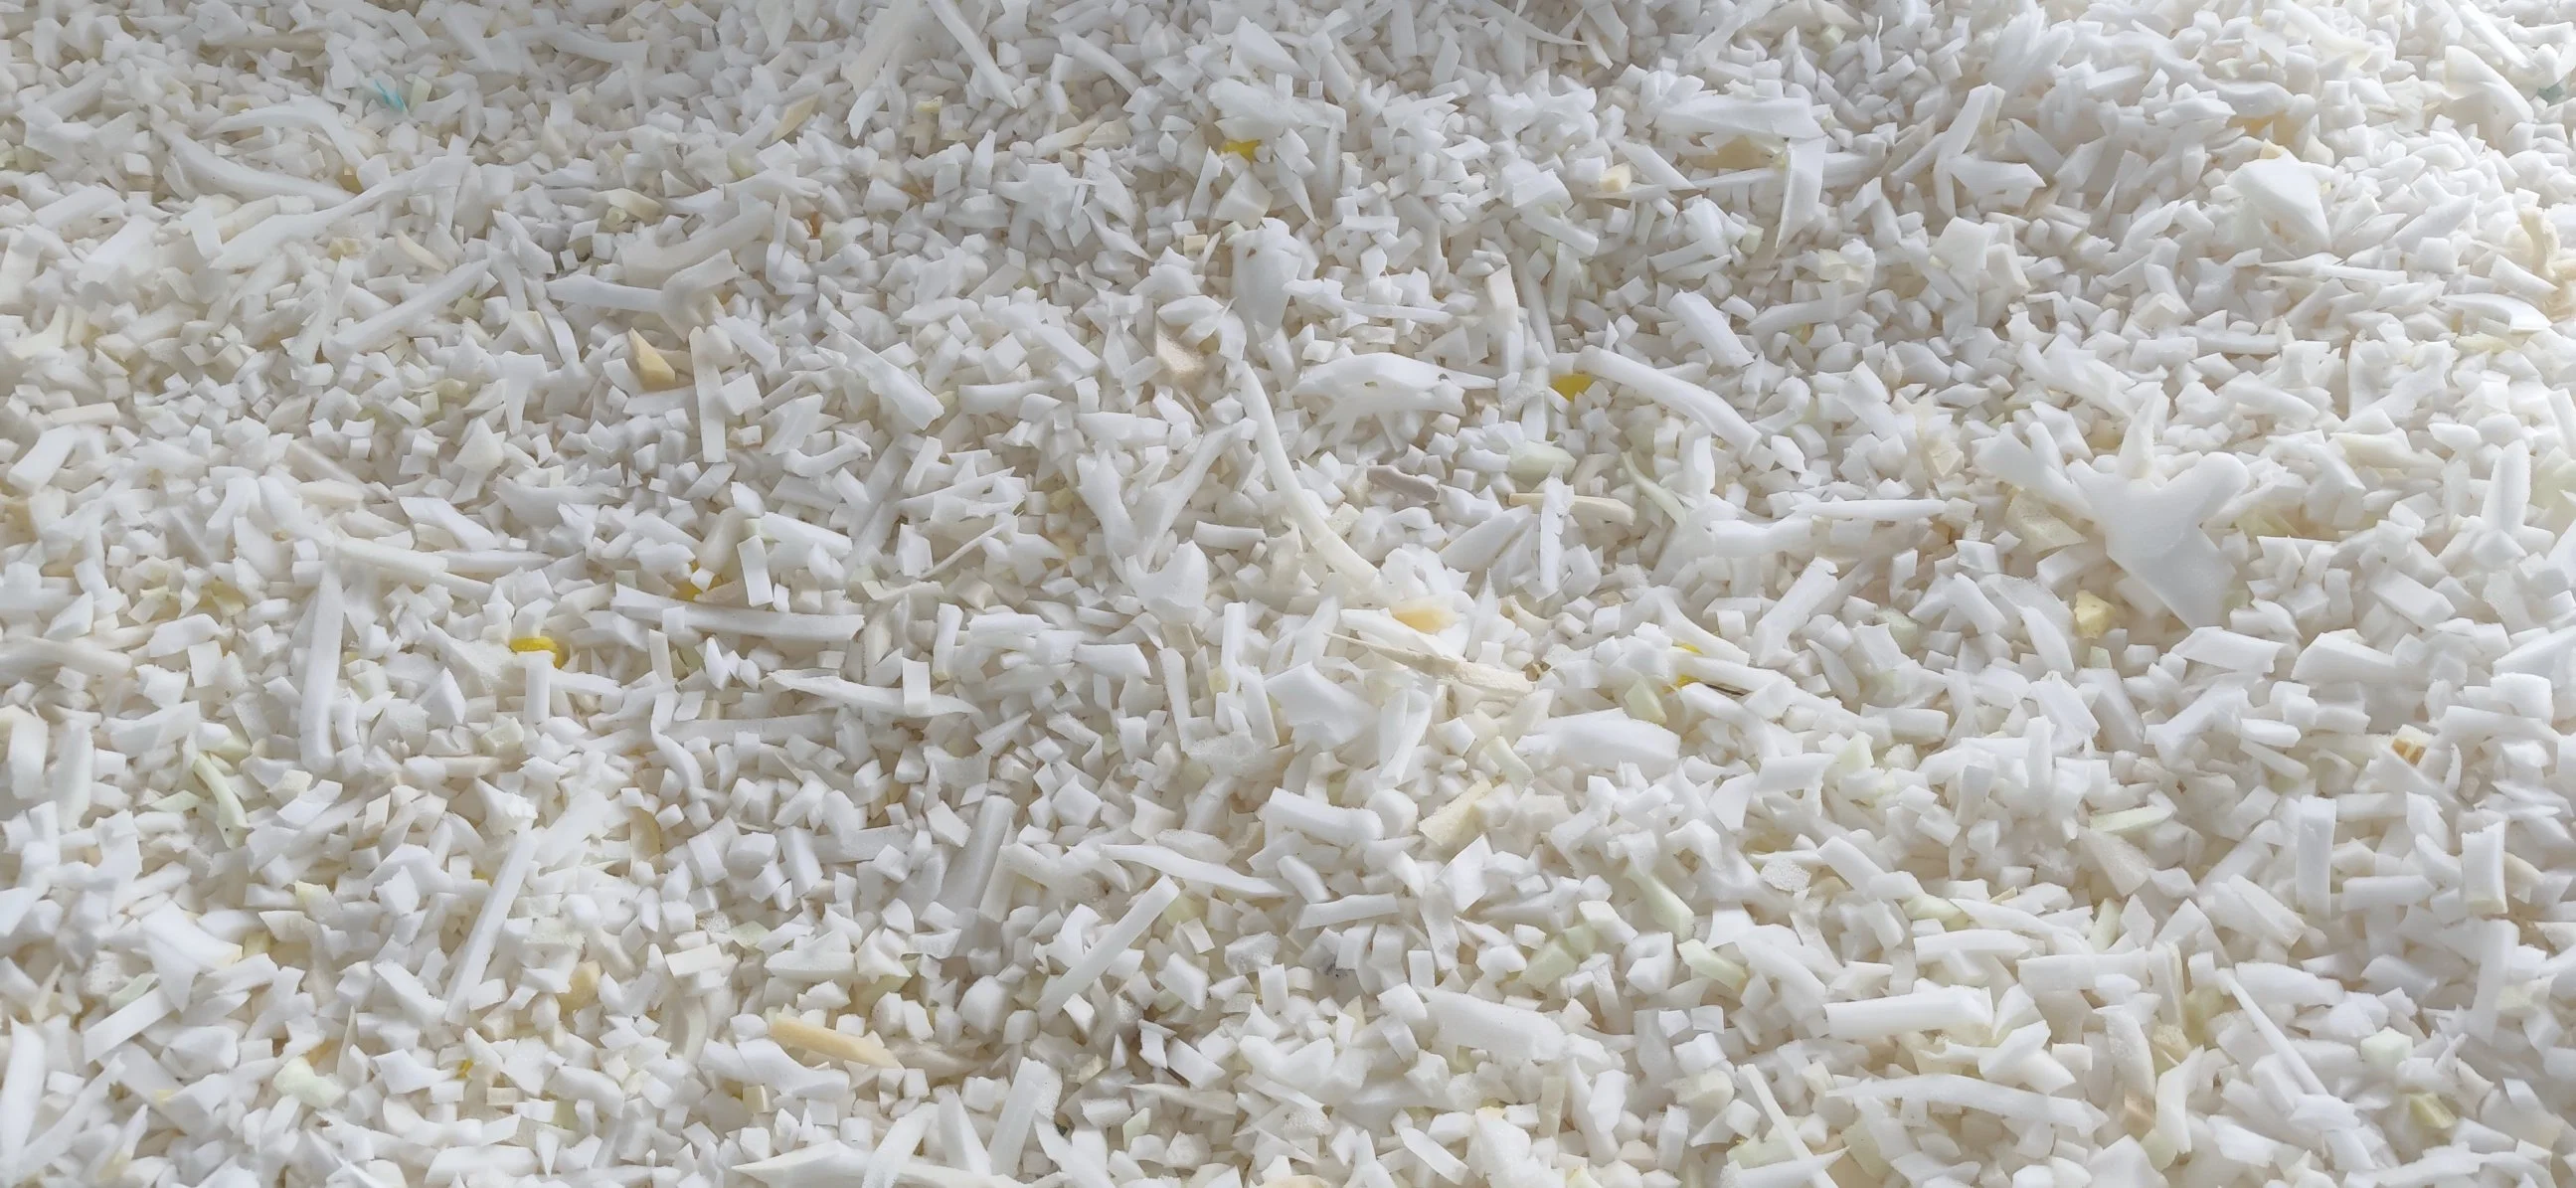 Shredded Memory Foam Filling for Pillows Stuffing, Dog Beds, or Cushions, Bean Bag Chairs in Home Life